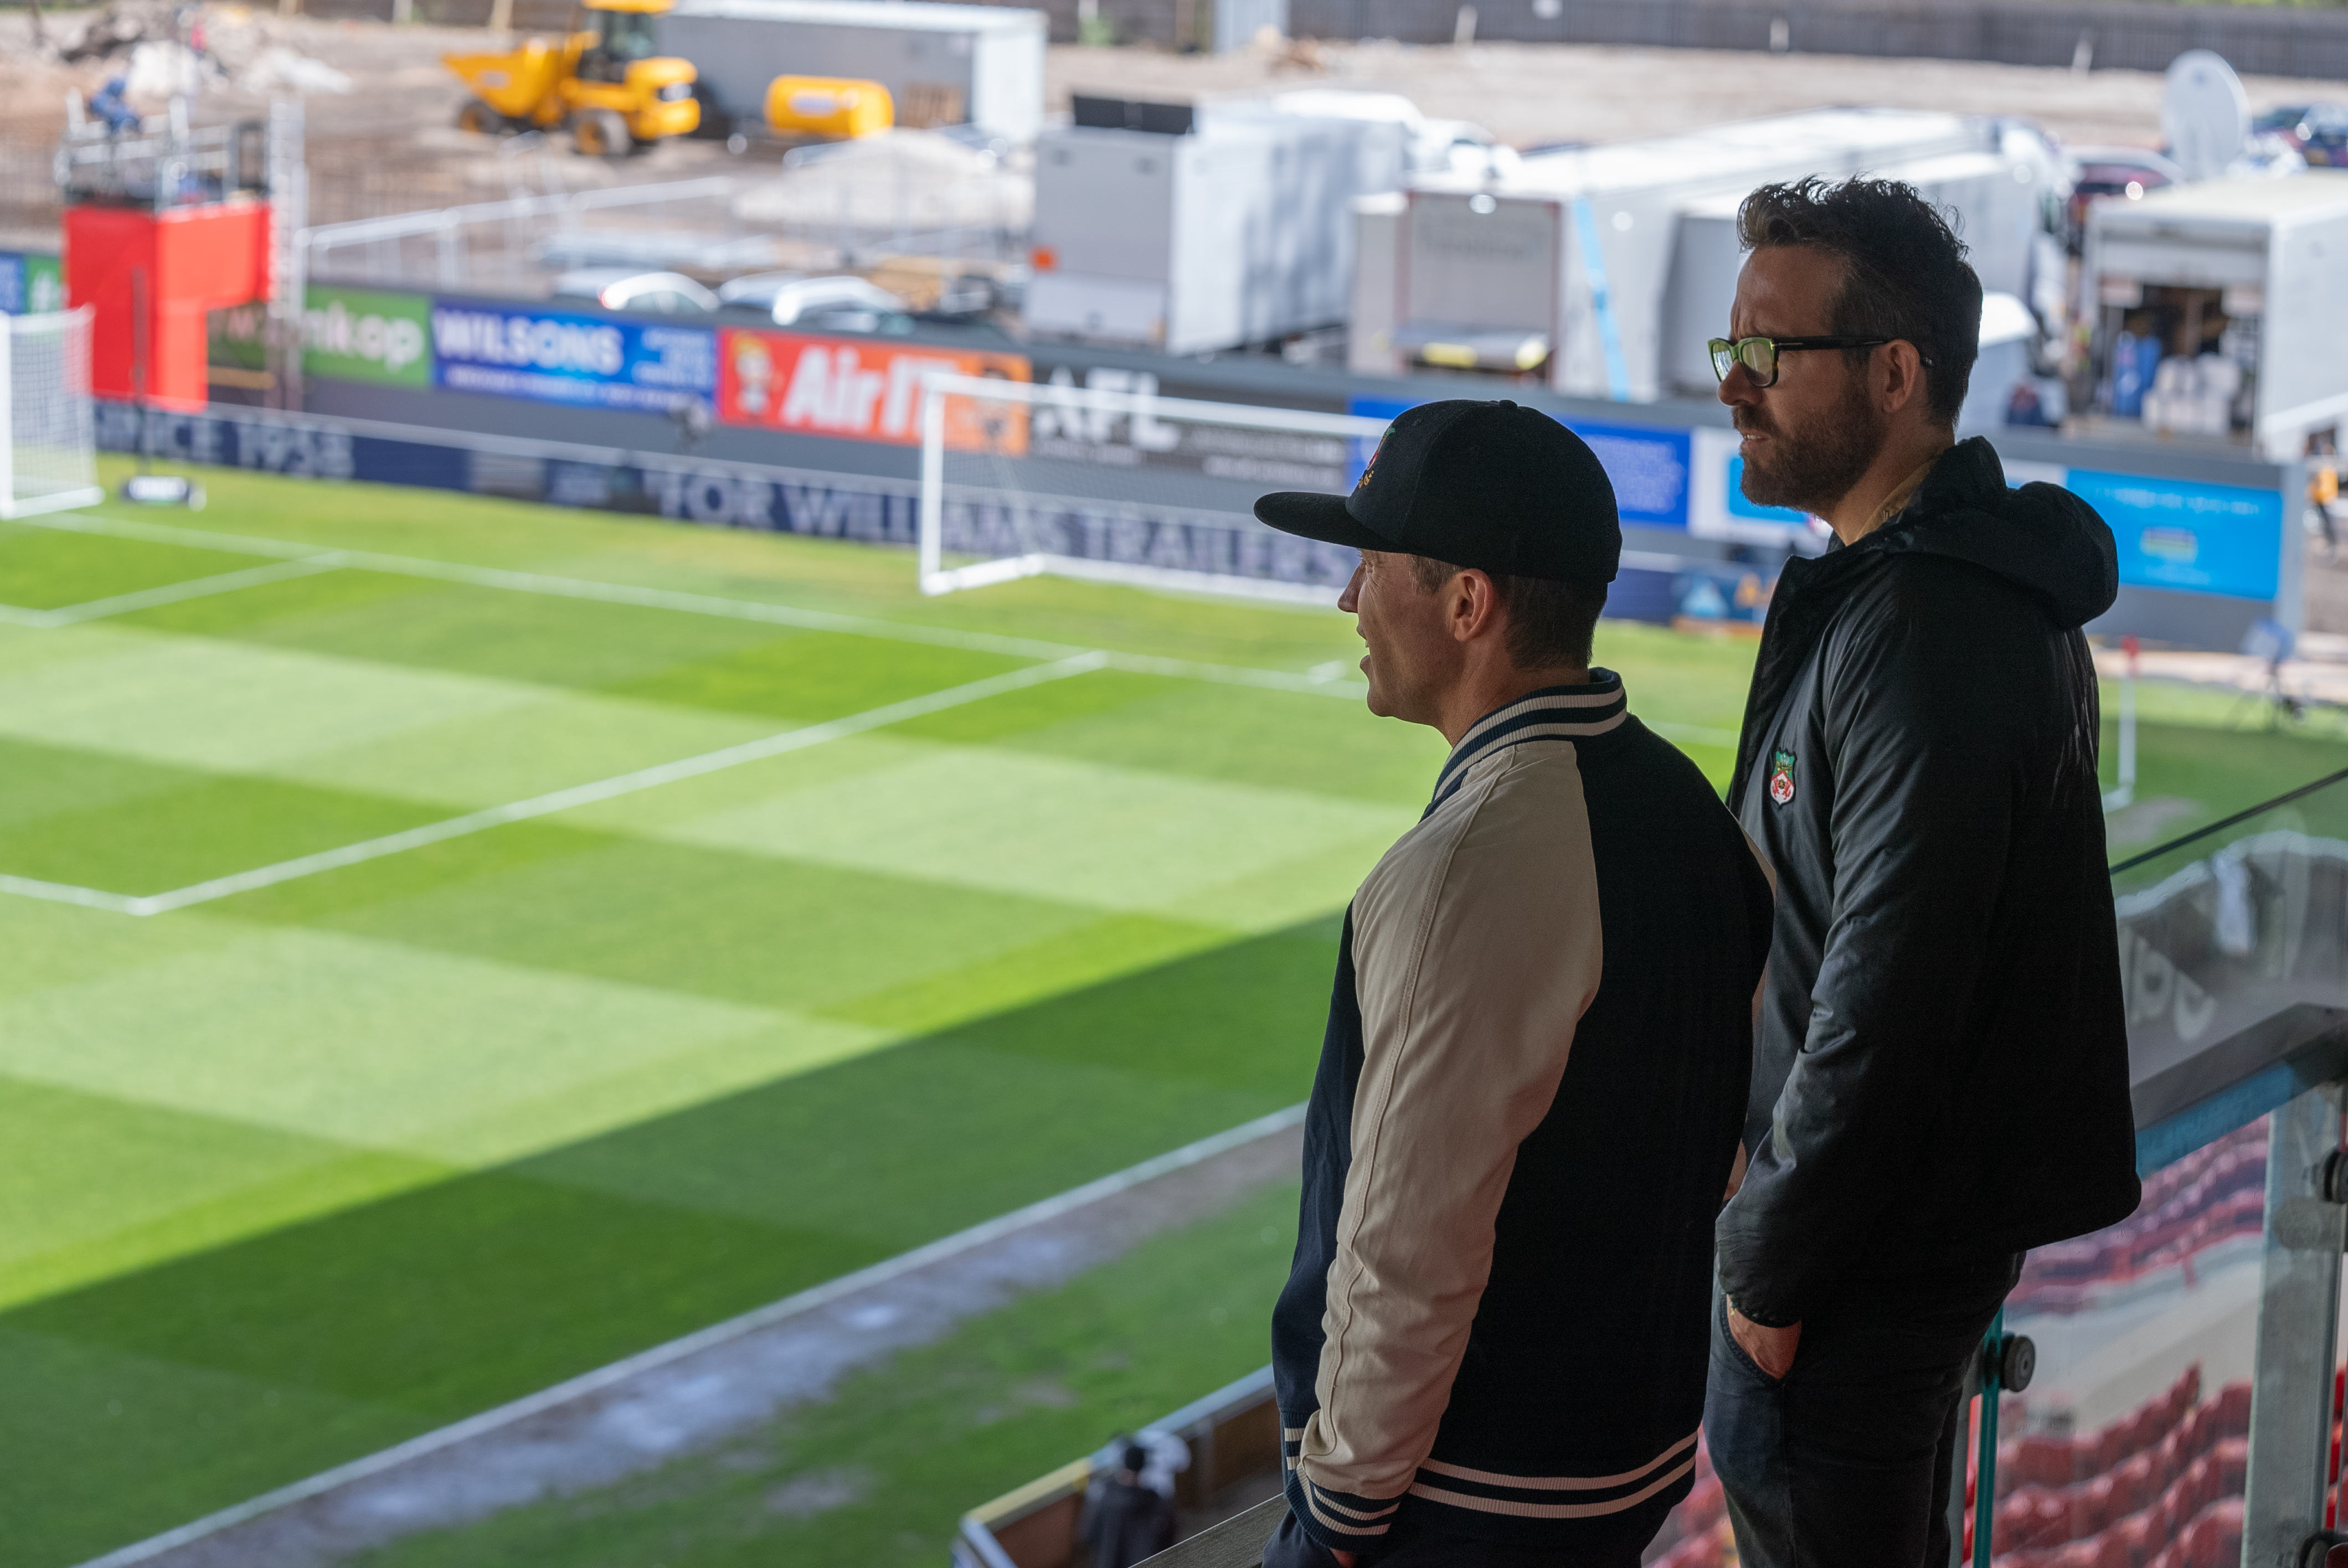 Rob McElhenney and Ryan Reynolds stand in the seats of a soccer stadium looking out over the pitch.